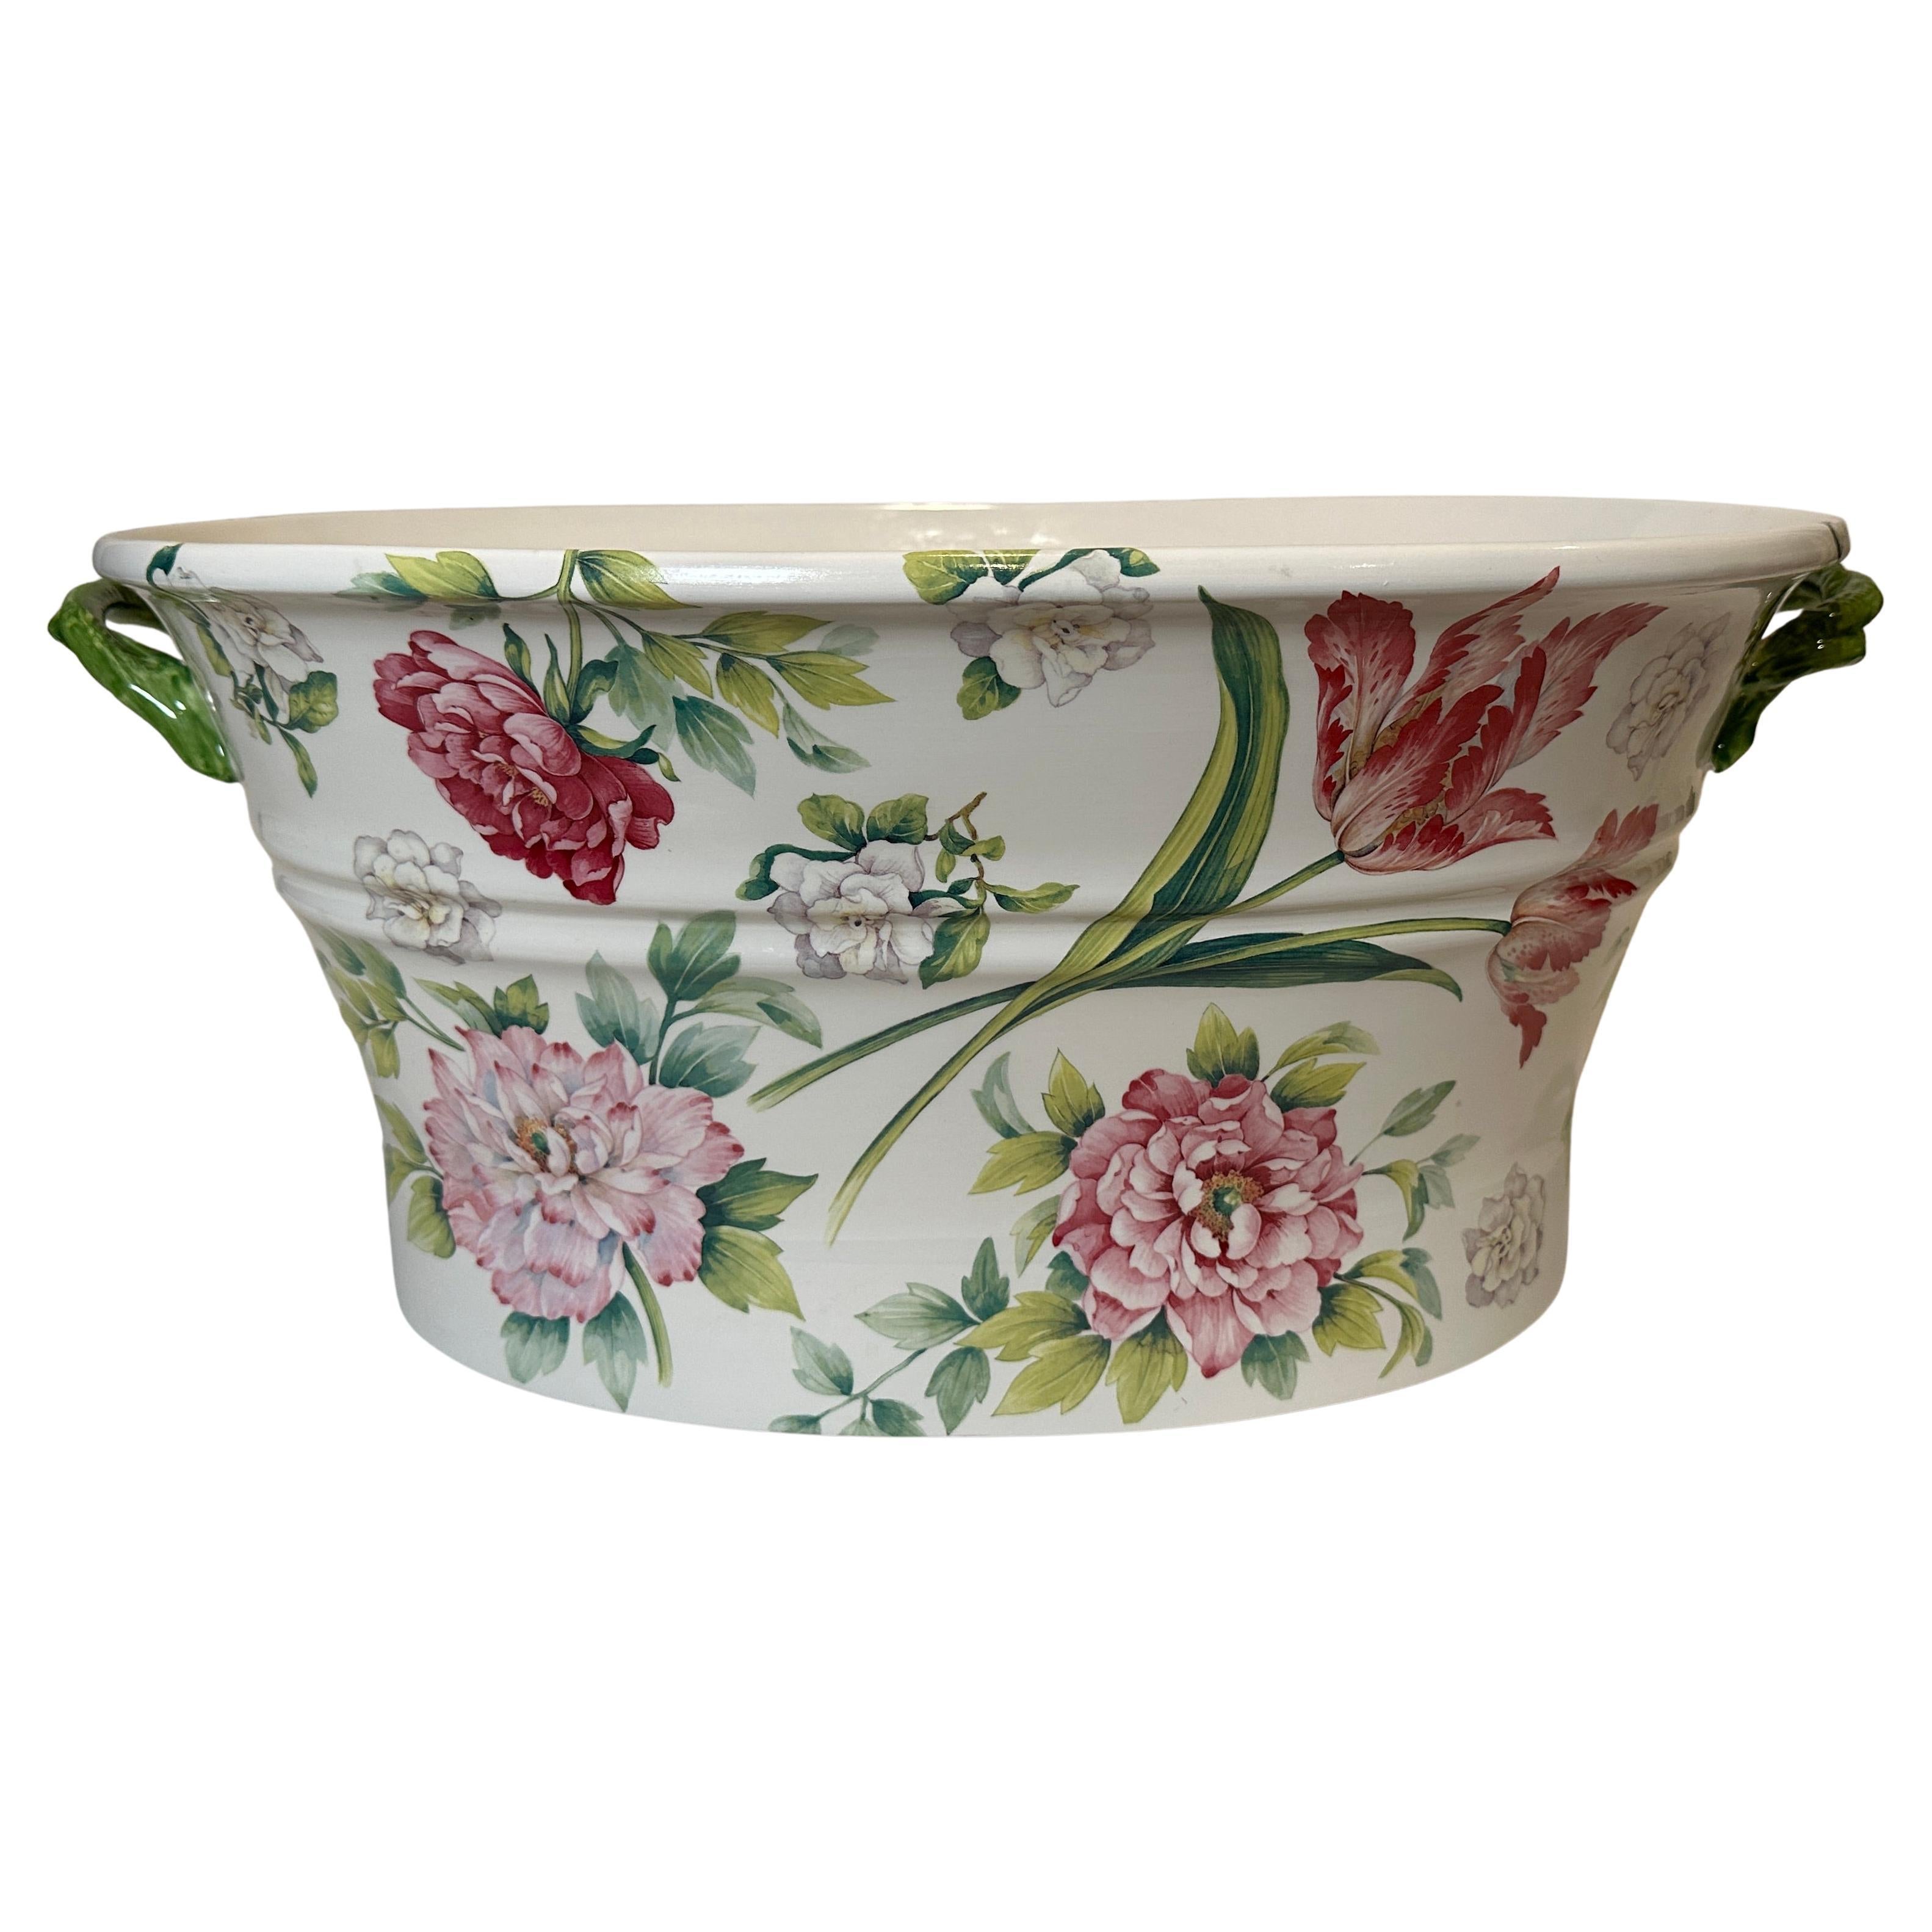 Italian Floral Painted Oval Planter For Sale